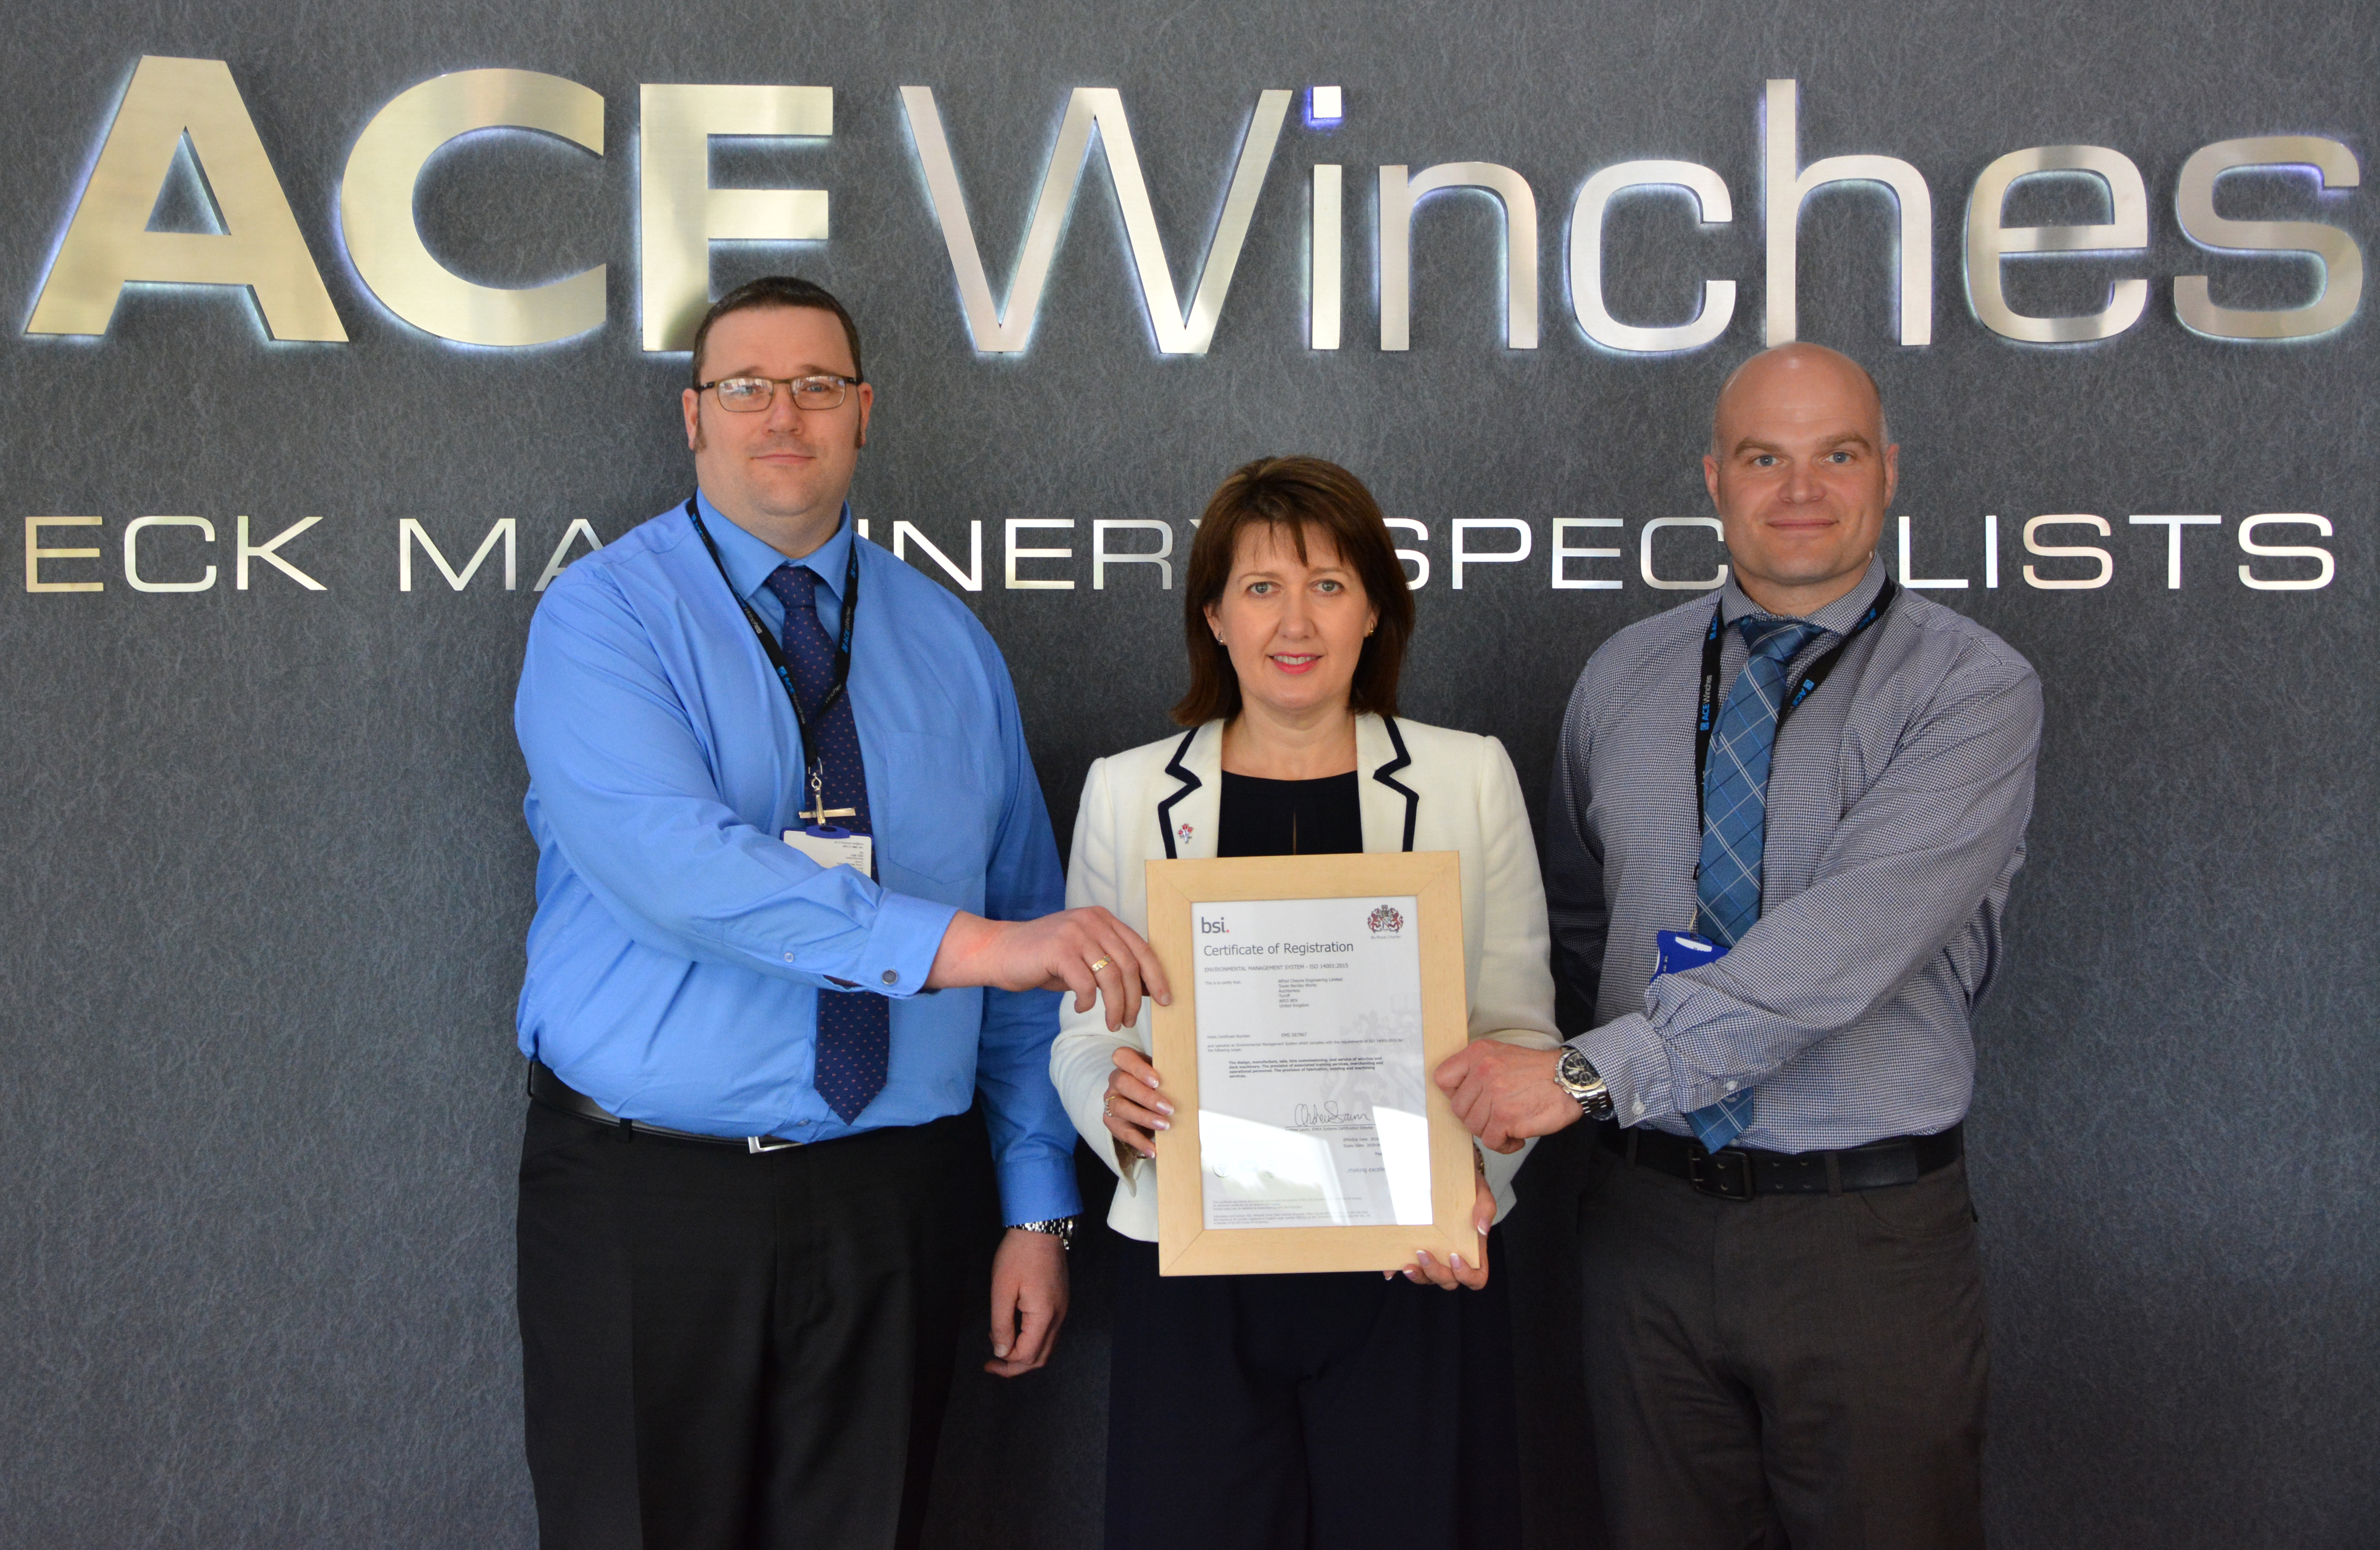 HIGH STANDARDS: ACE WINCHES AWARDED CERTIFICATION FOR ENVIRONMENTAL MANAGEMENT SYSTEMS